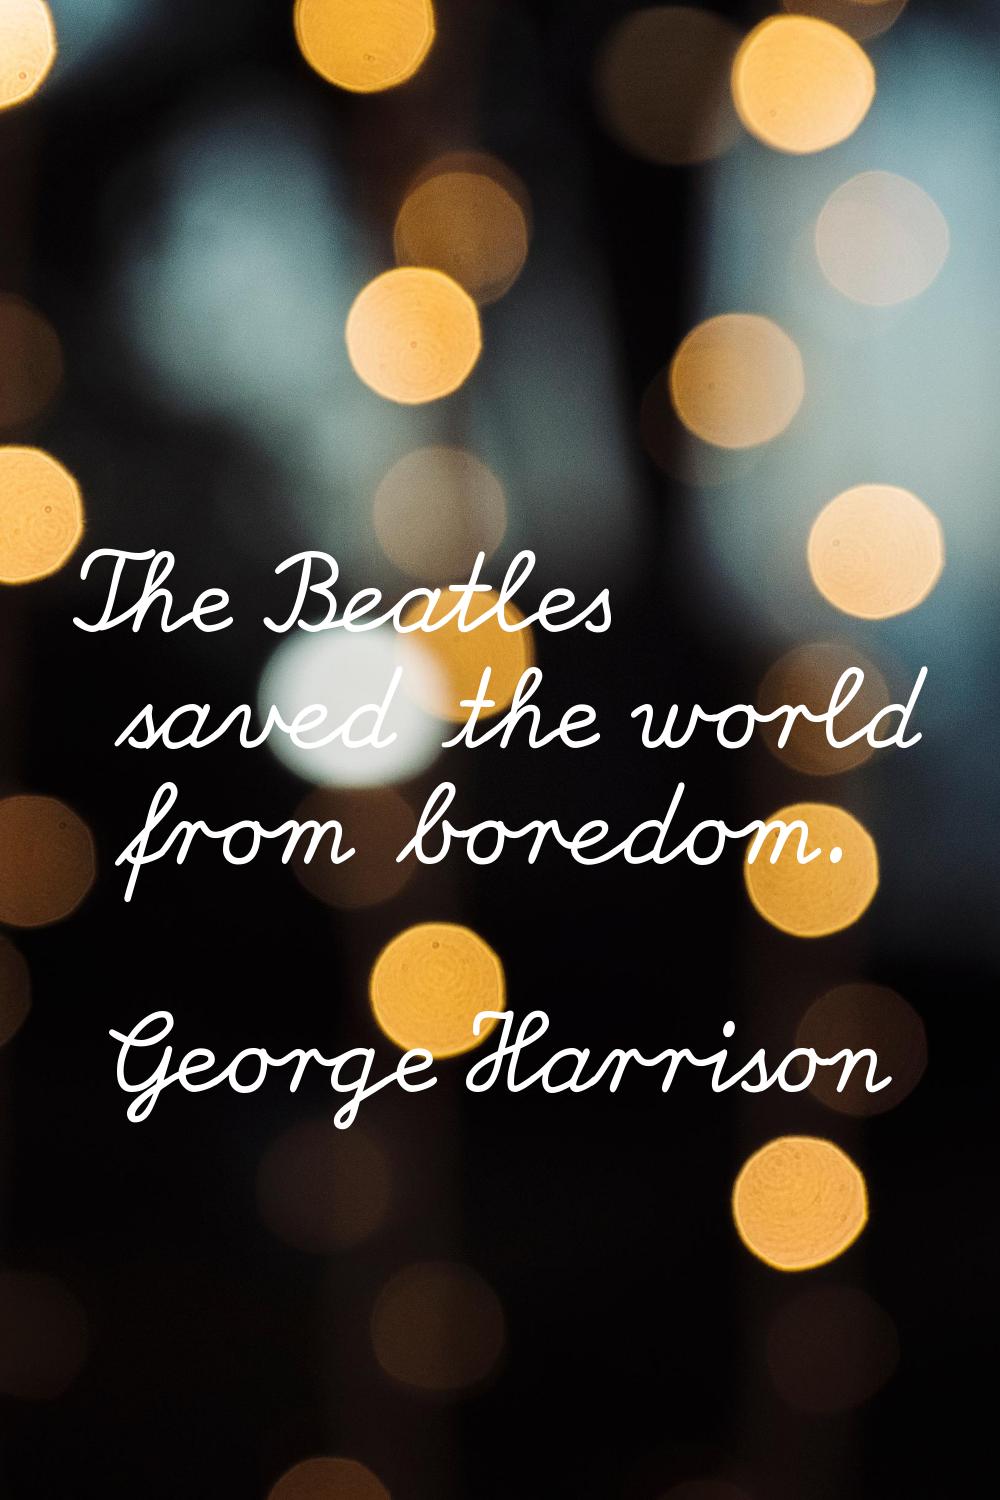 The Beatles saved the world from boredom.